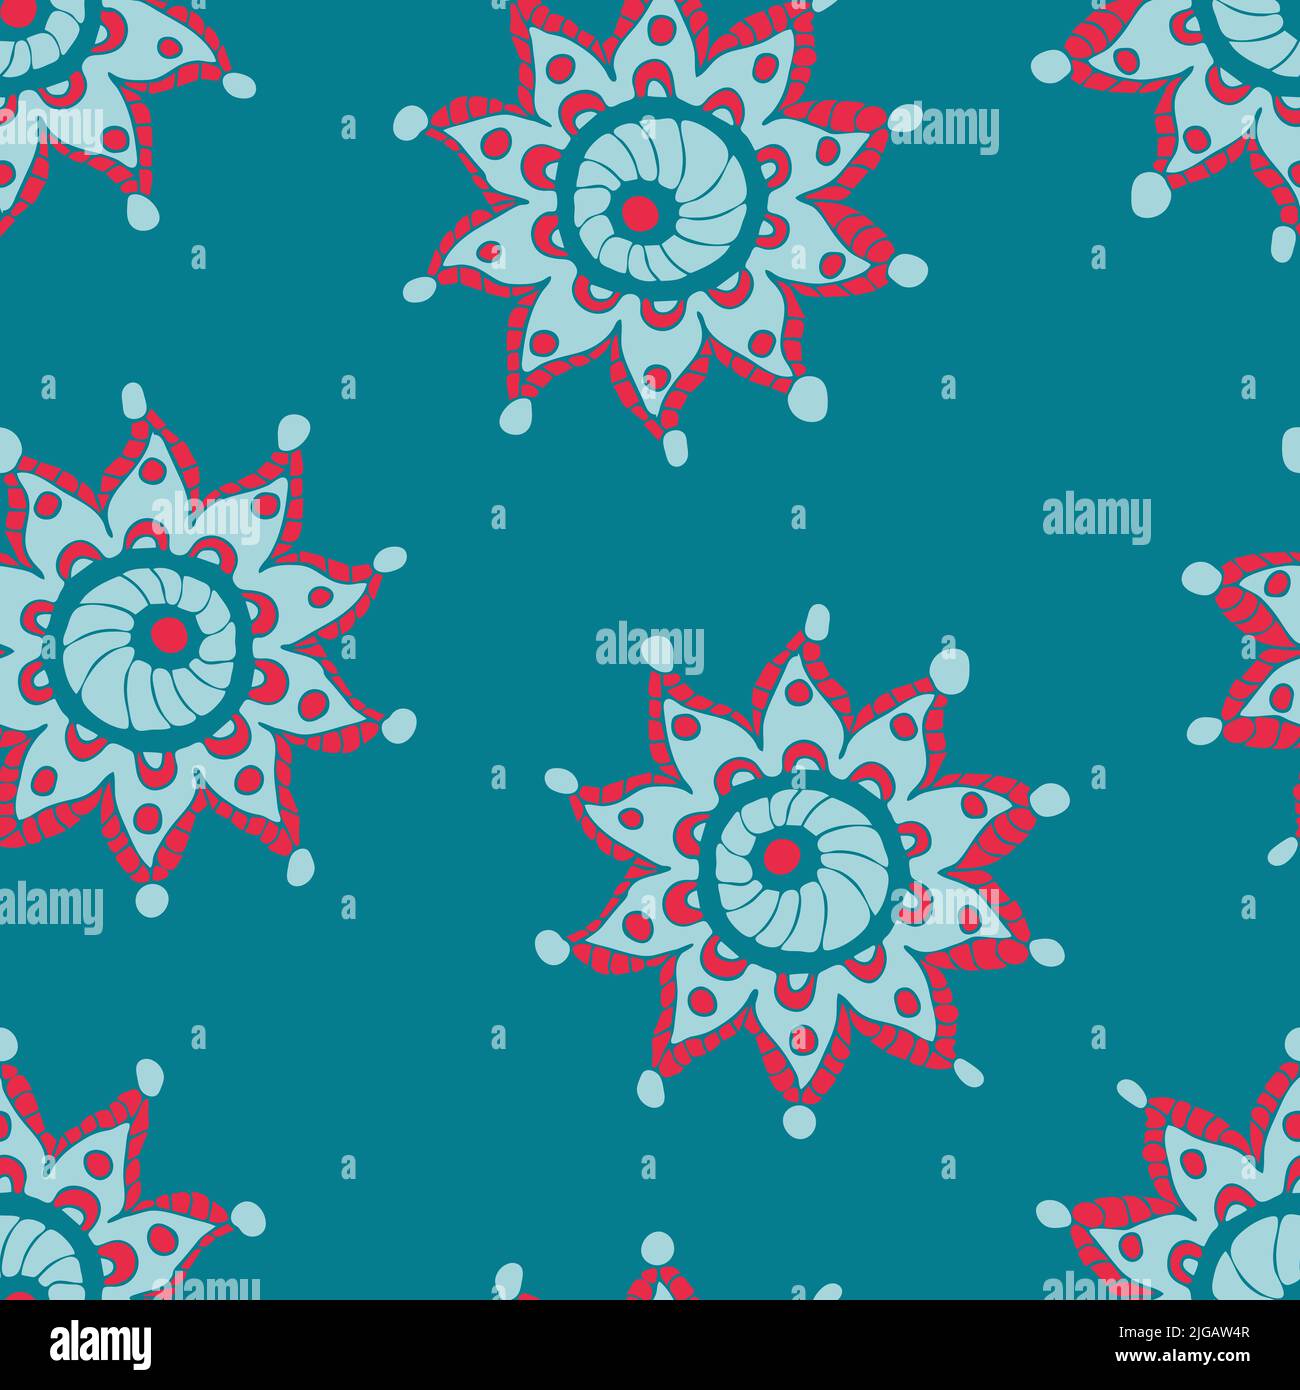 Seamless vector pattern with abstract flower on blue background. Gypsy style wallpaper design with artistic star. Decorative floral fashion textile. Stock Vector